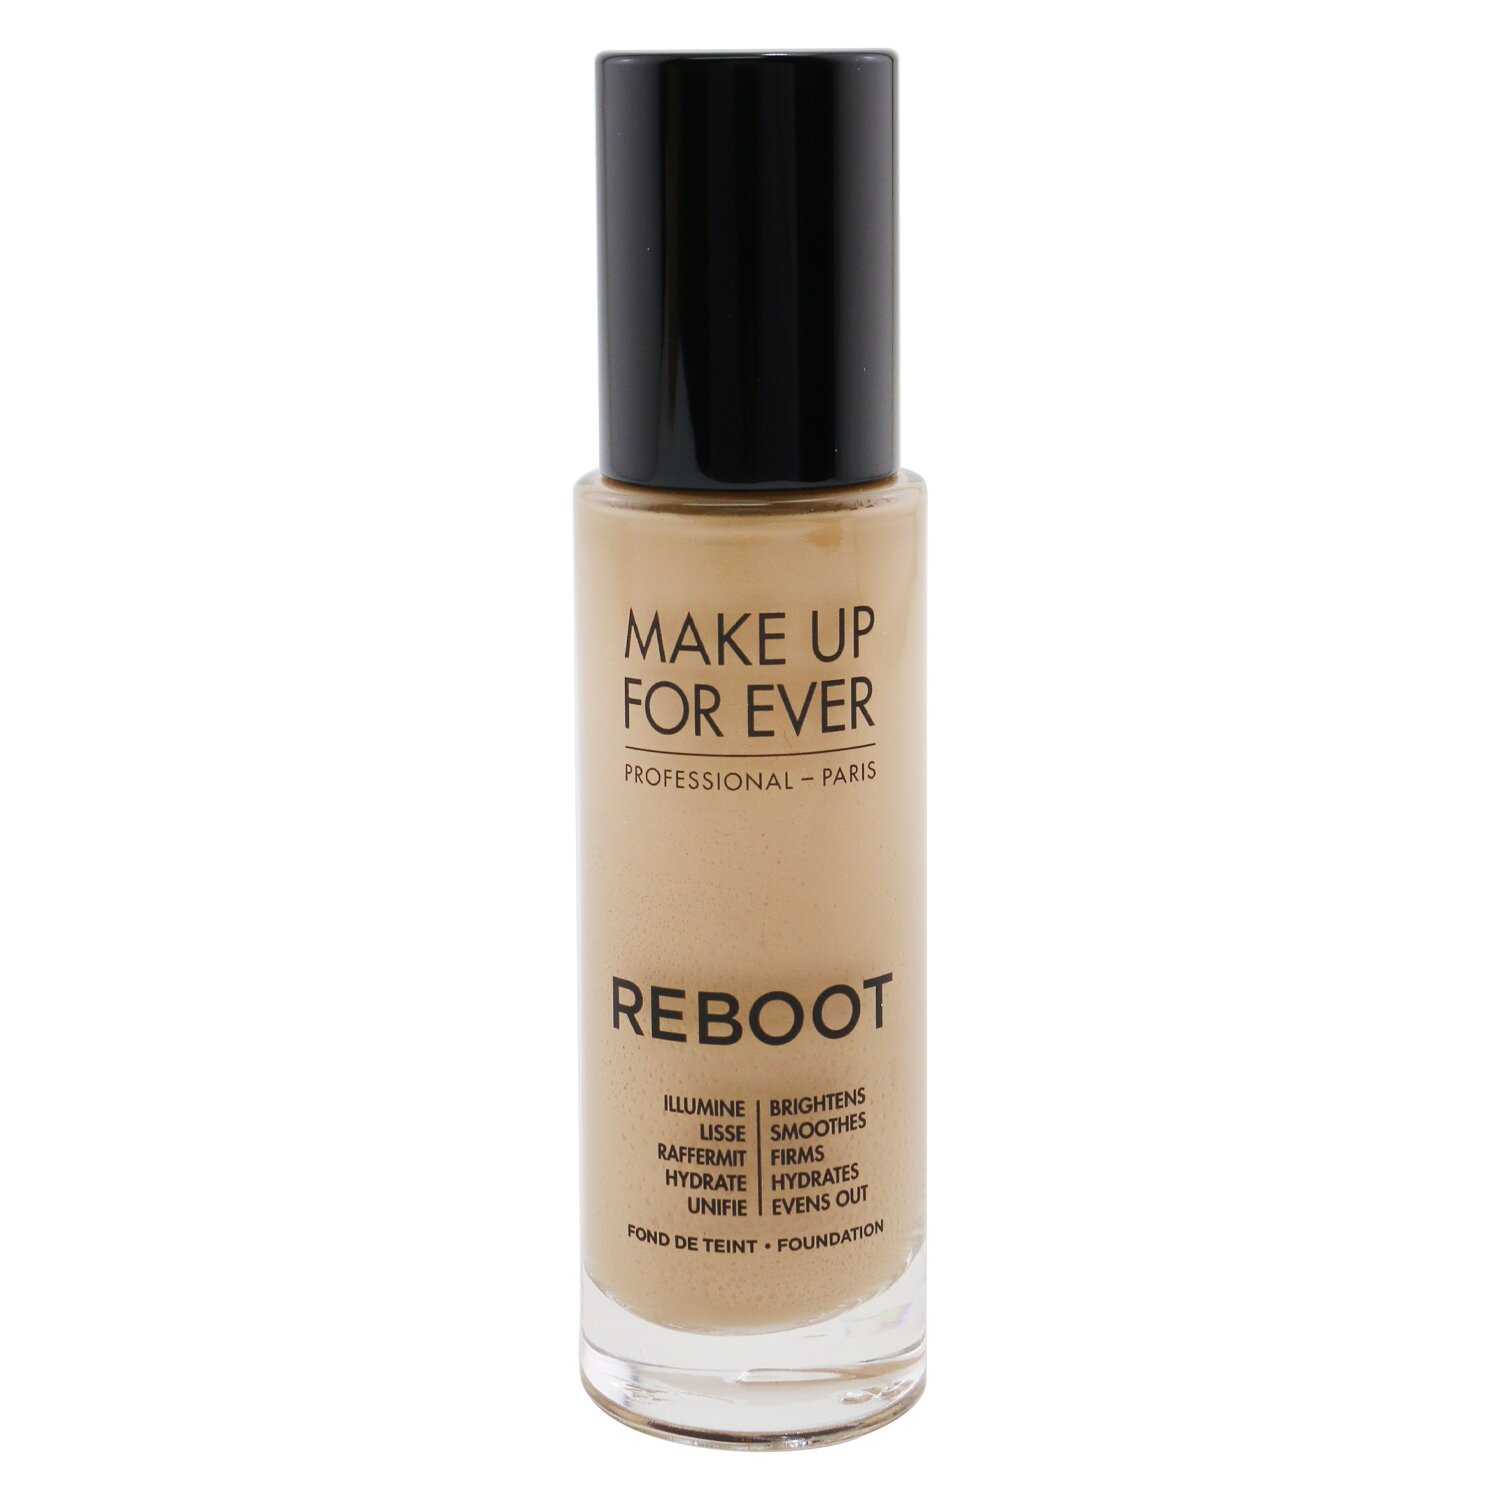 Make Up For Ever Reboot Active Care In Foundation 30ml/1.01oz